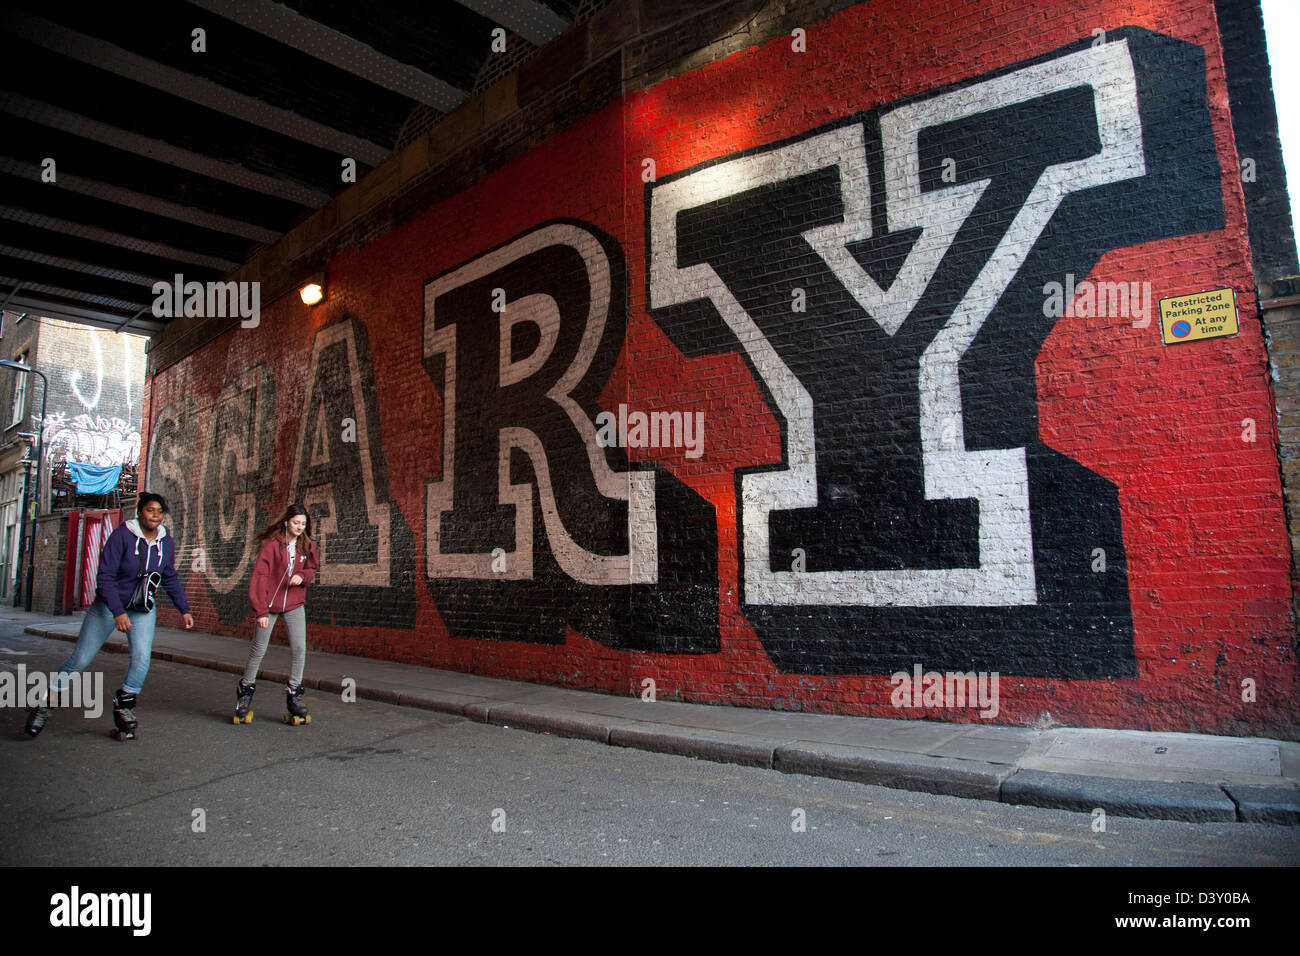 Urban girls rollerskate past the SCARY street art mural by Ben Eine in Shoreditch, East London. Stock Photo